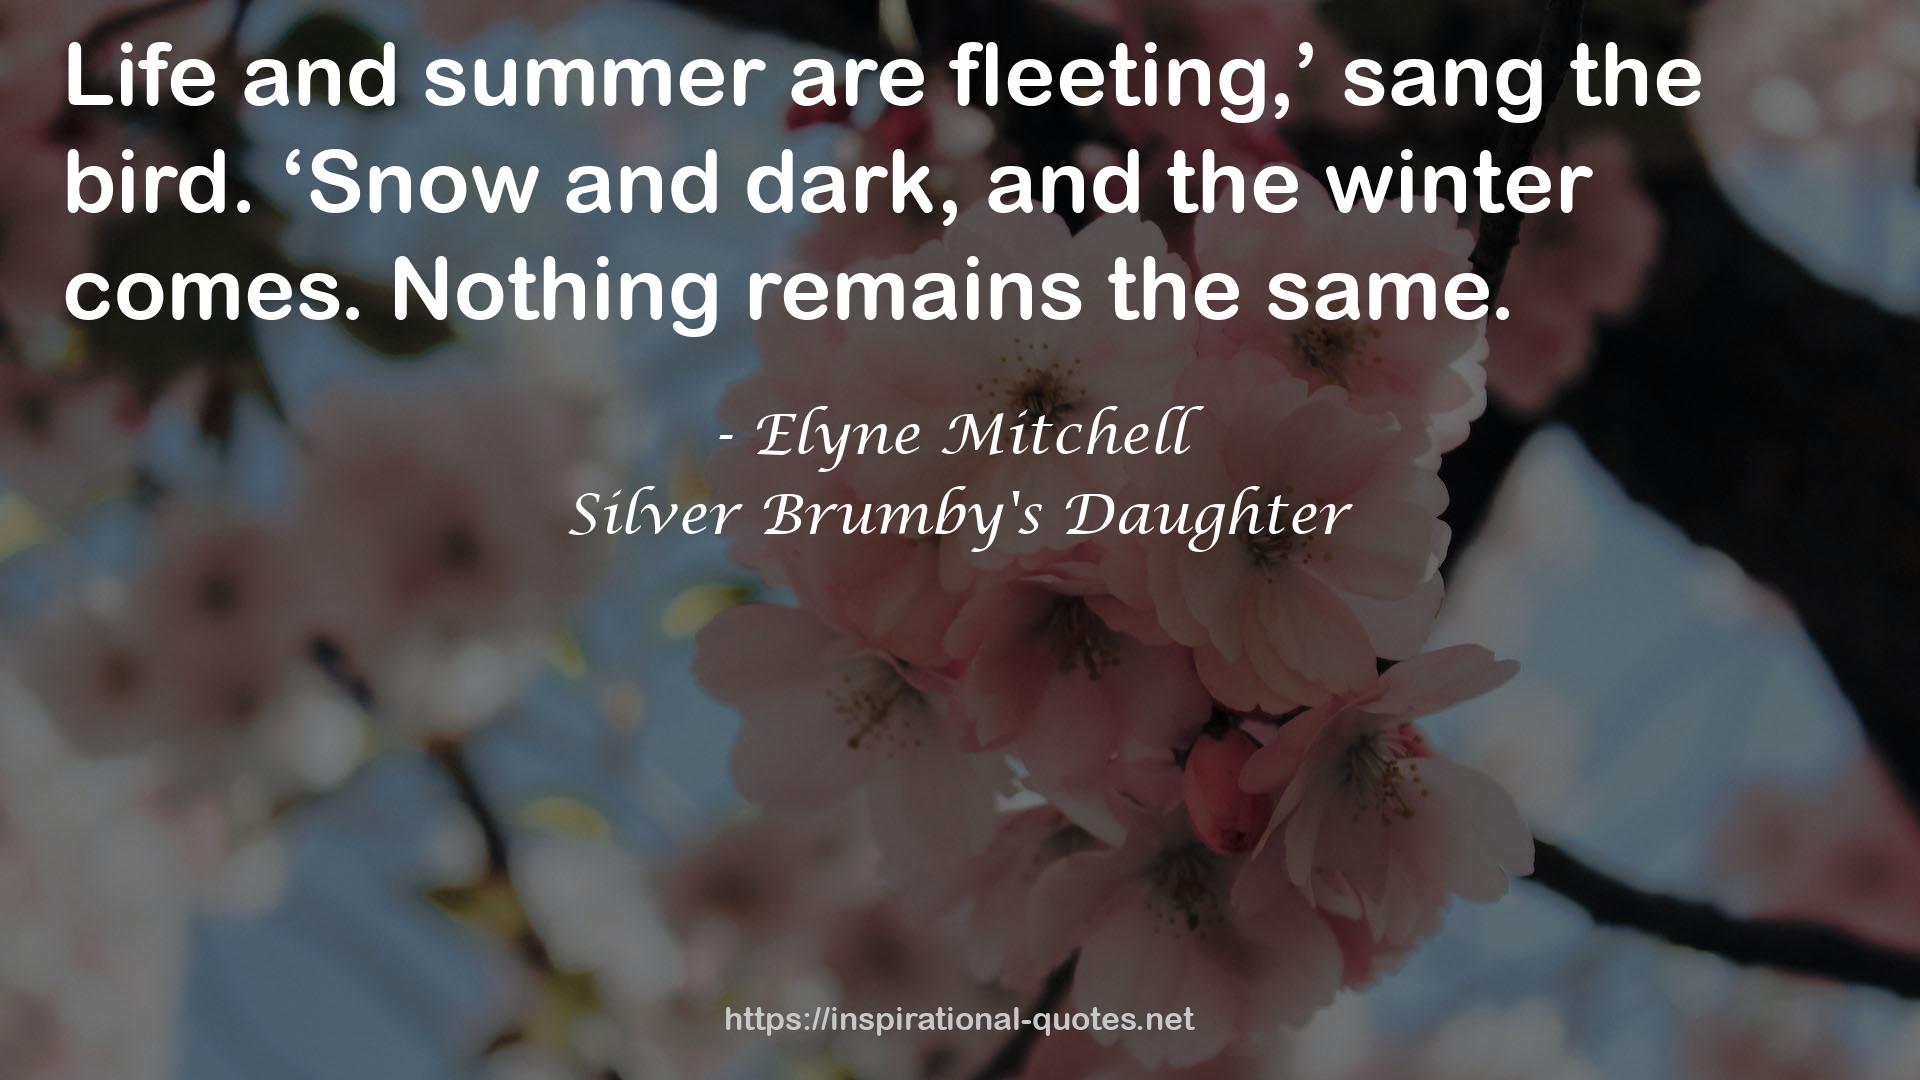 Silver Brumby's Daughter QUOTES